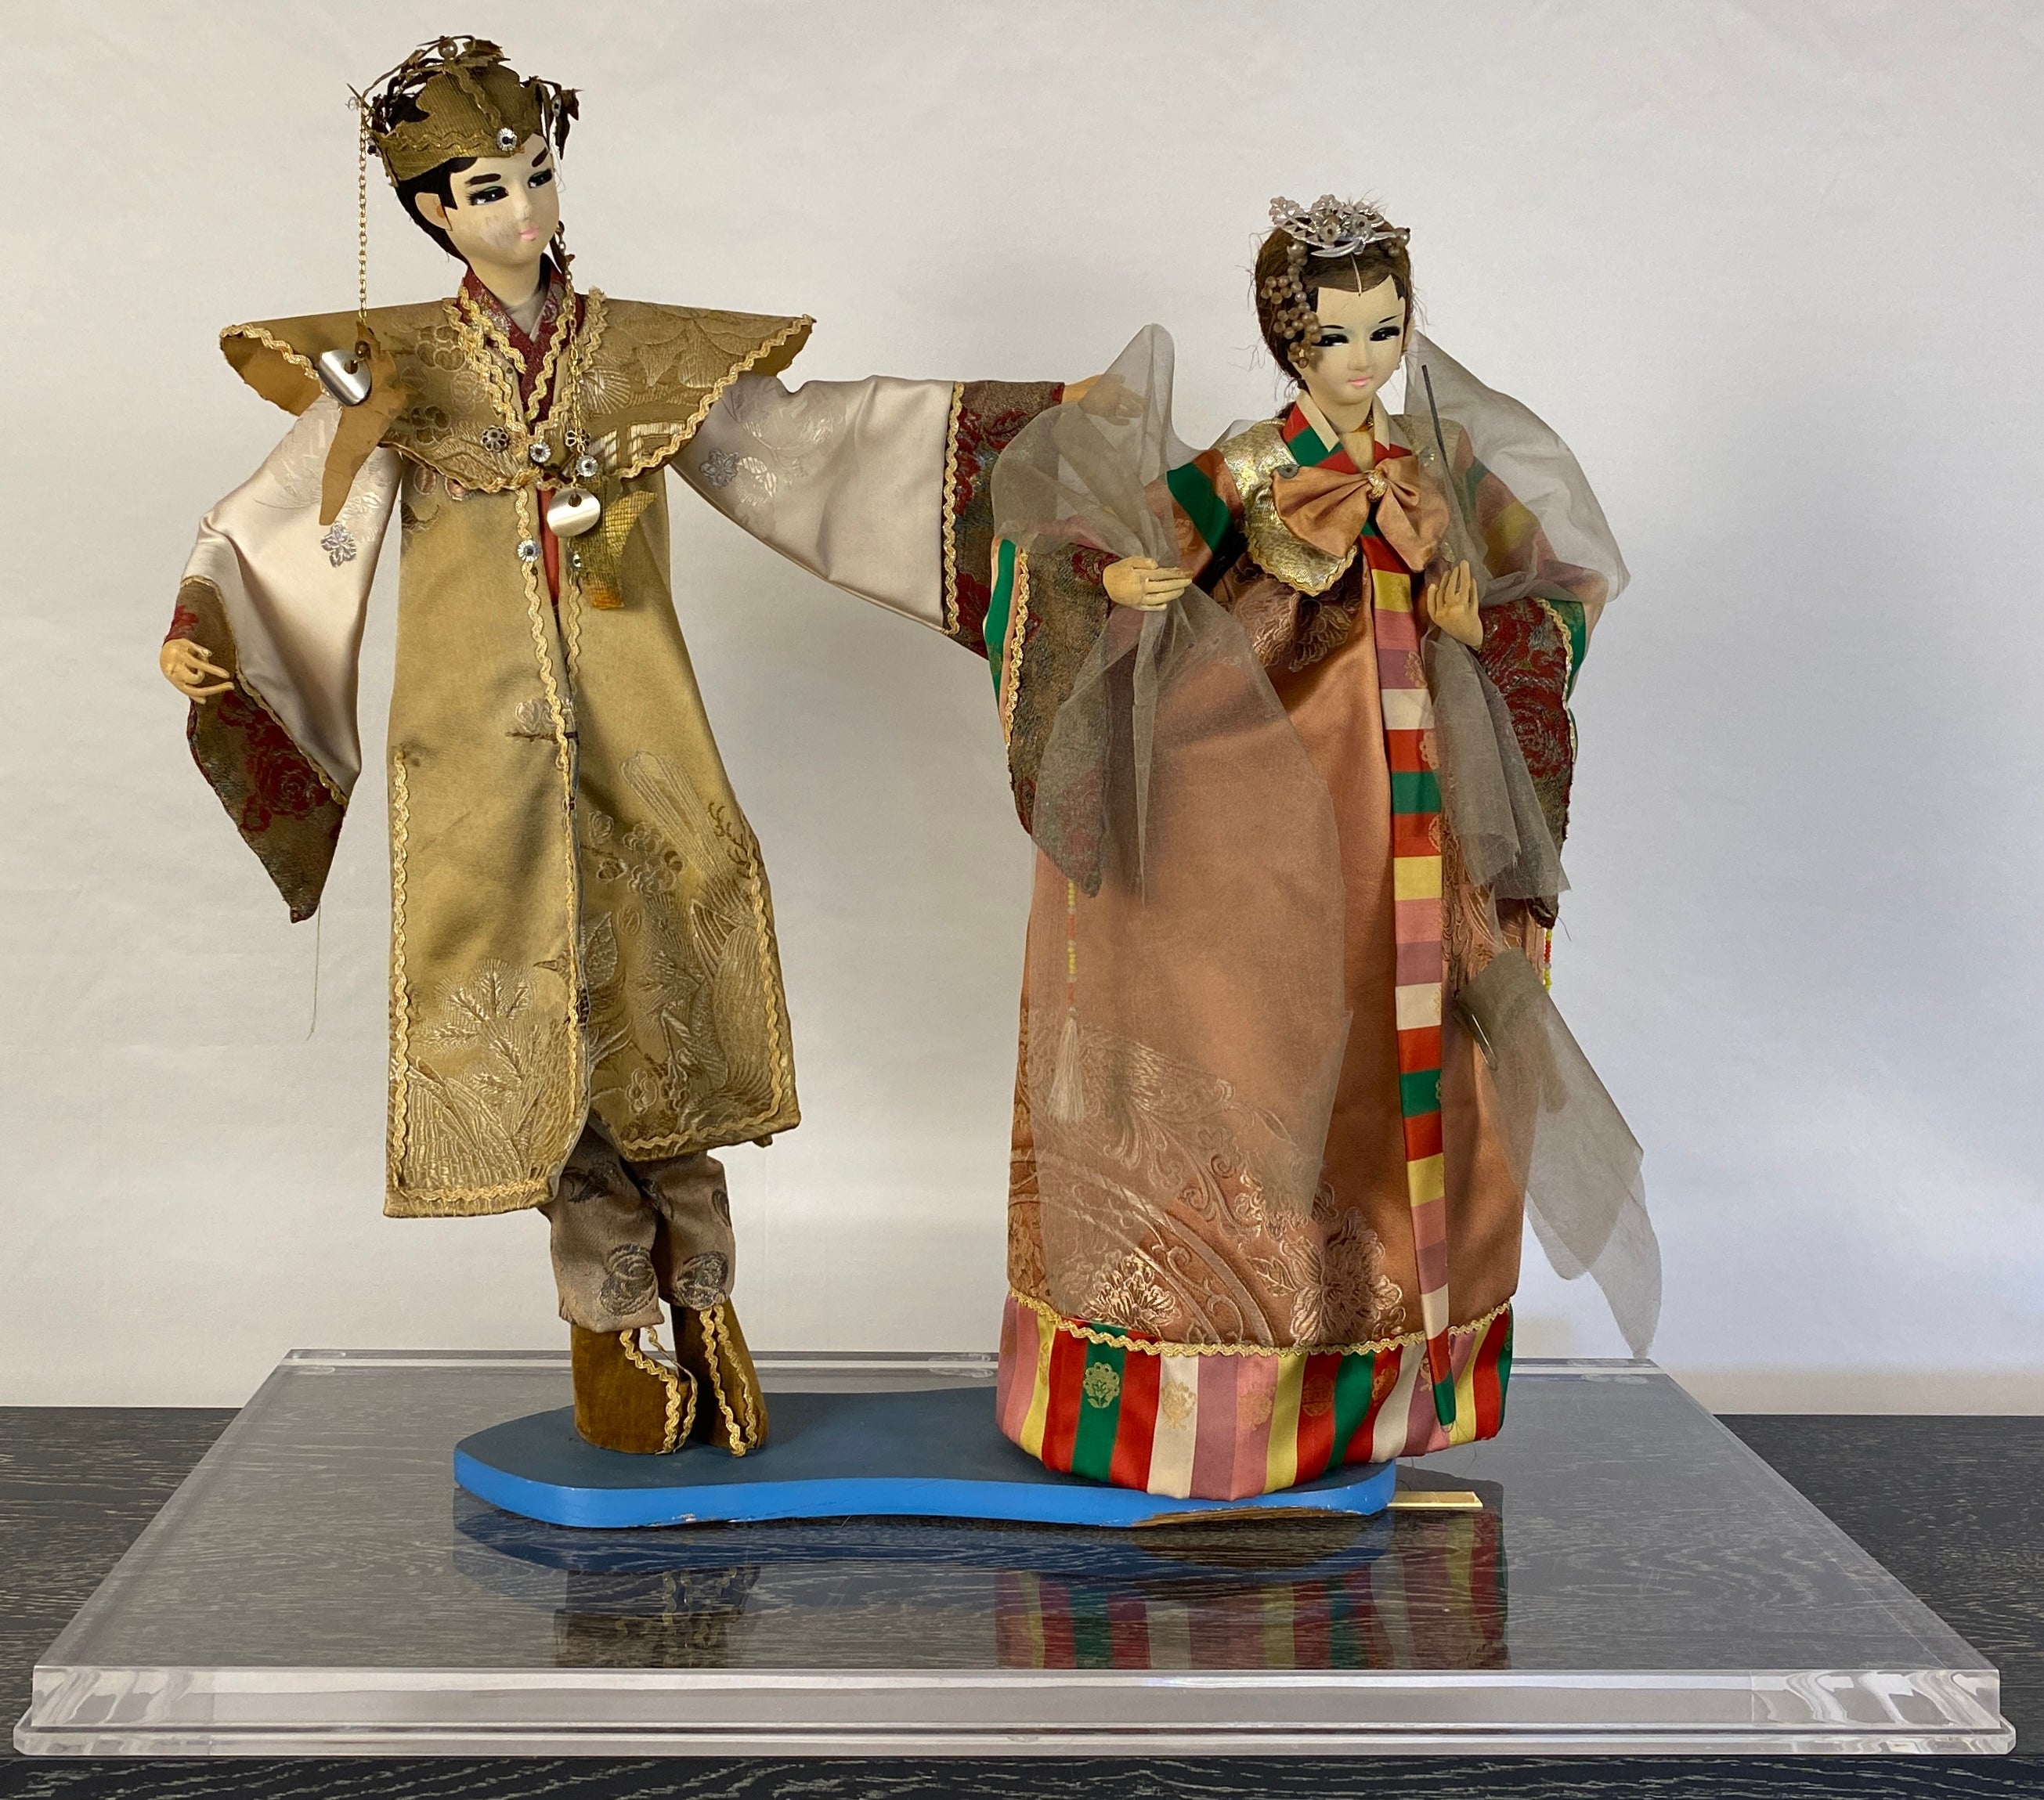 A fine quality pair of 20th century Oriental puppet dolls with original costumes.

These decorative Oriental puppets are framed in Lucite making them easy to display on a table, console or shelf. Interesting and pleasing to the eye. Delivered